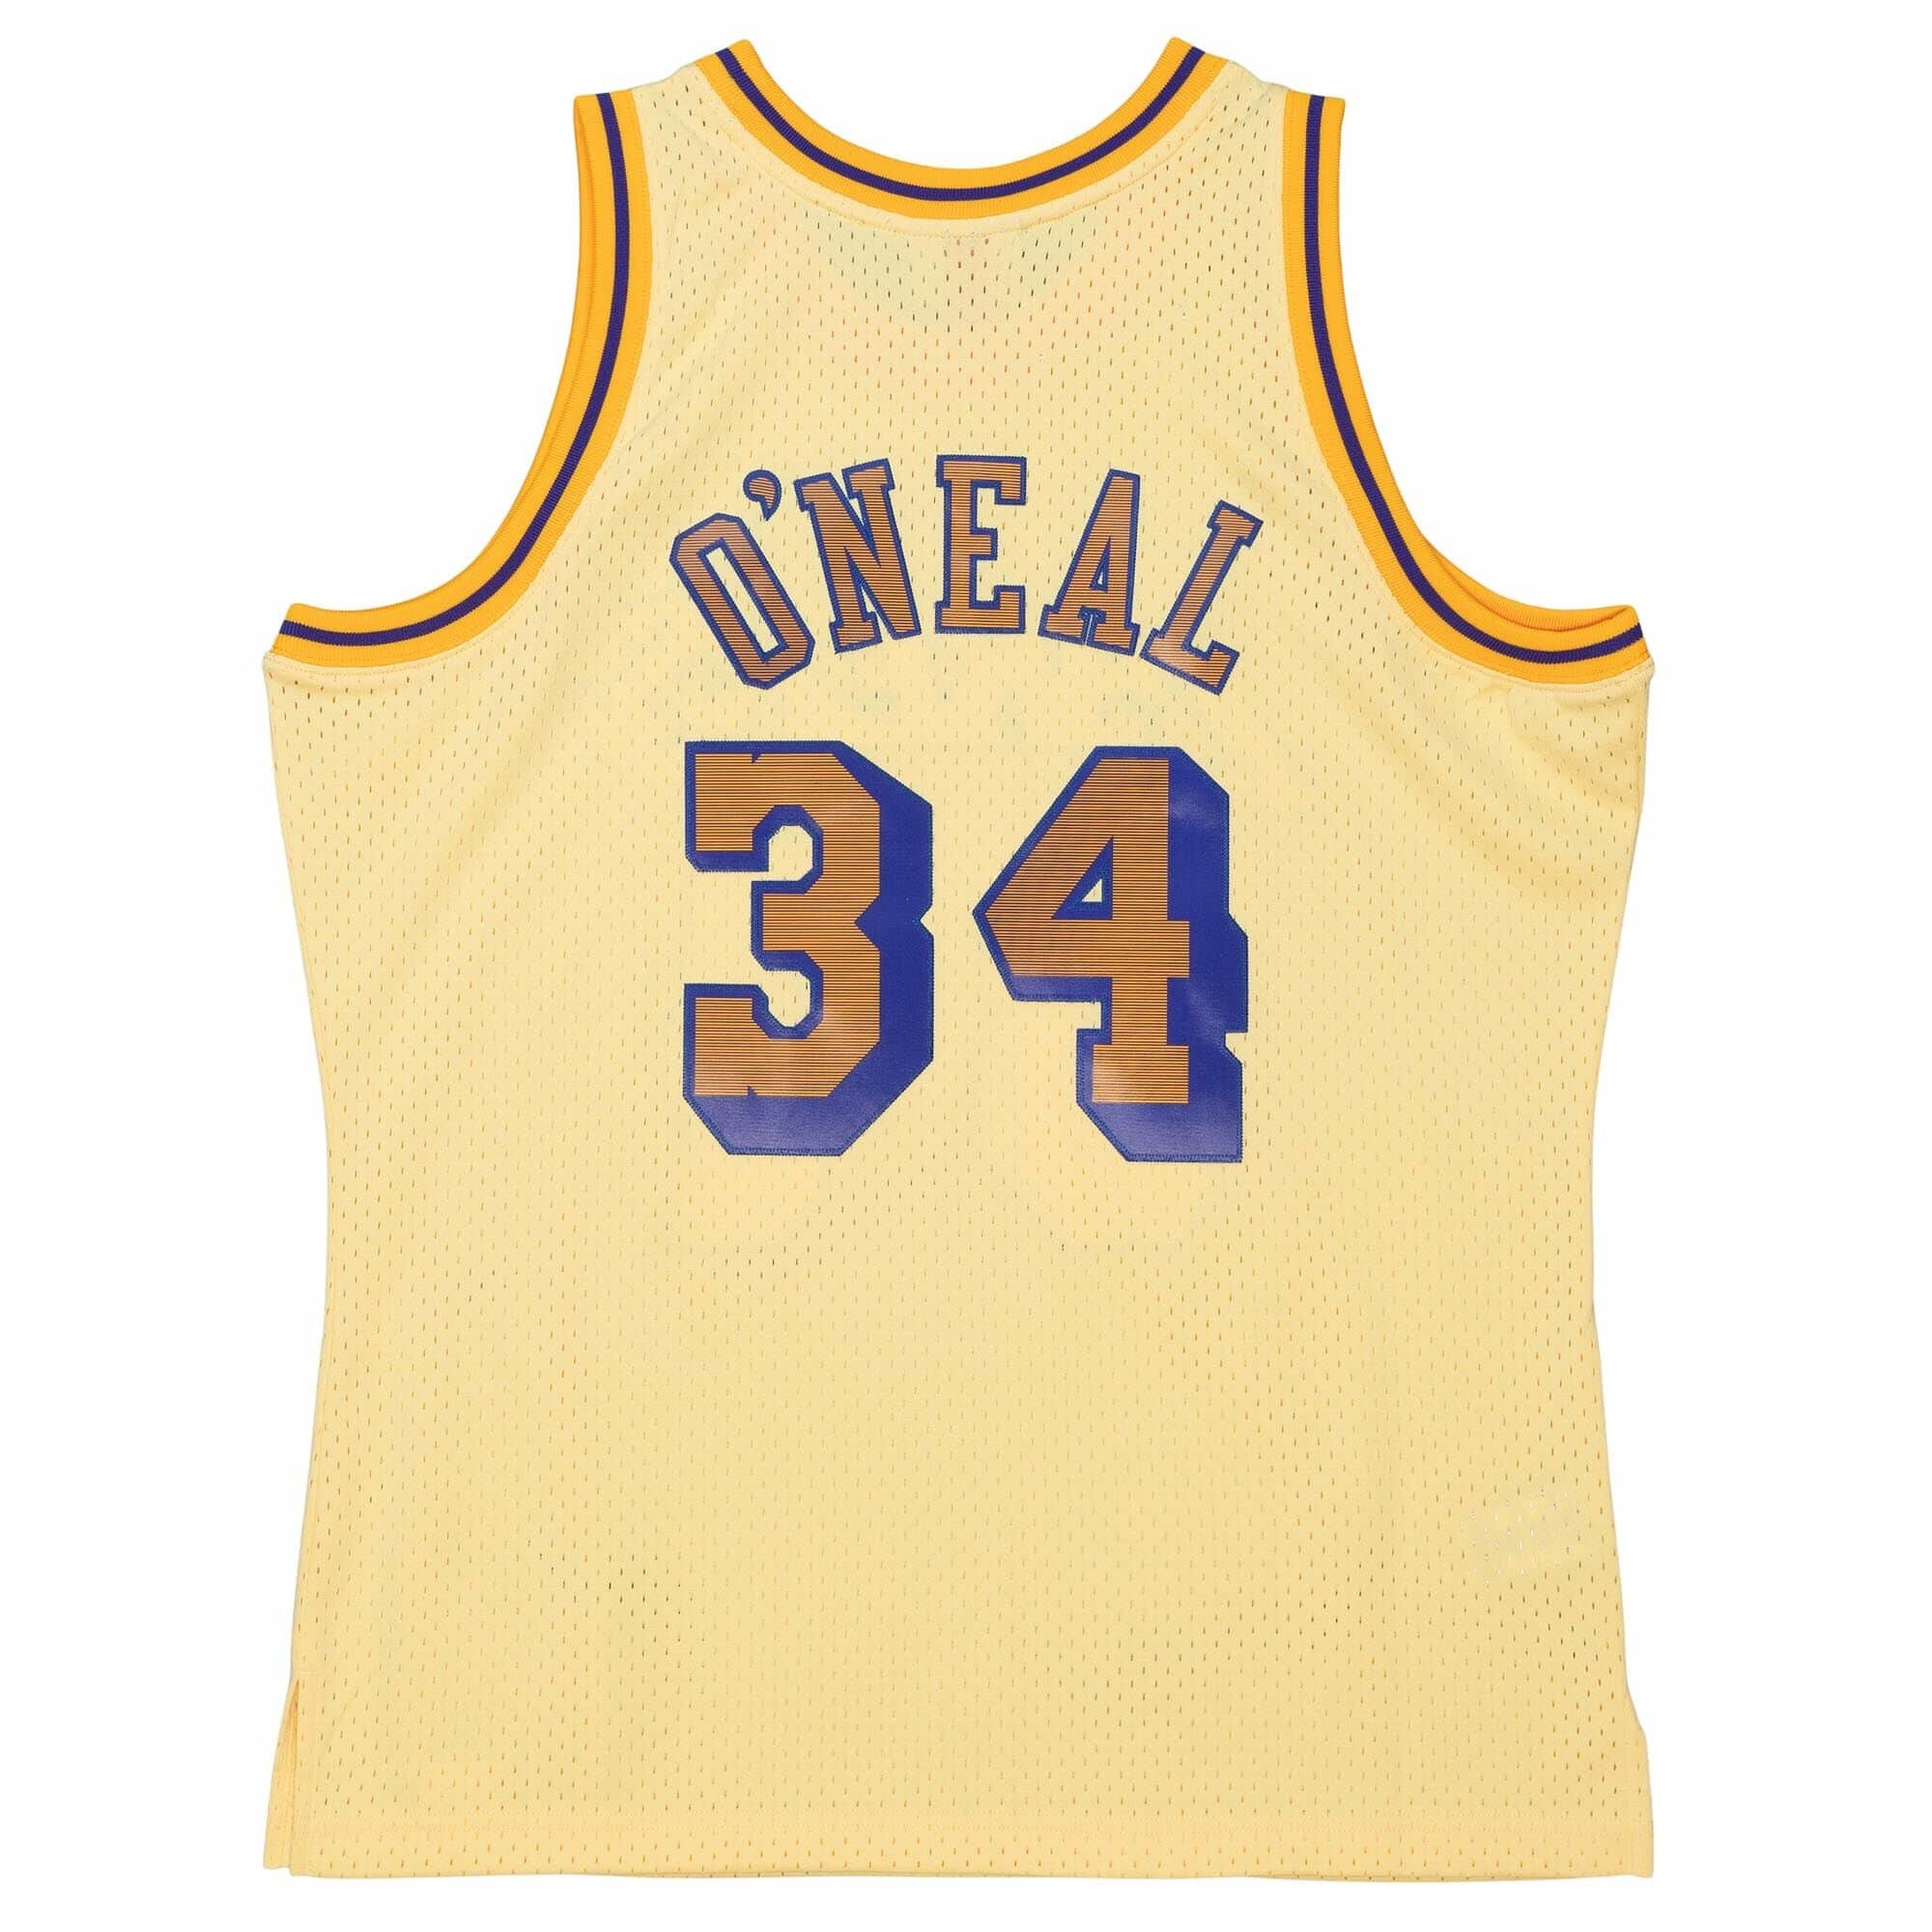 Mitchell & Ness Shaquille O'Neal Los Angeles Lakers Men's 2001-02 Swingman Jersey